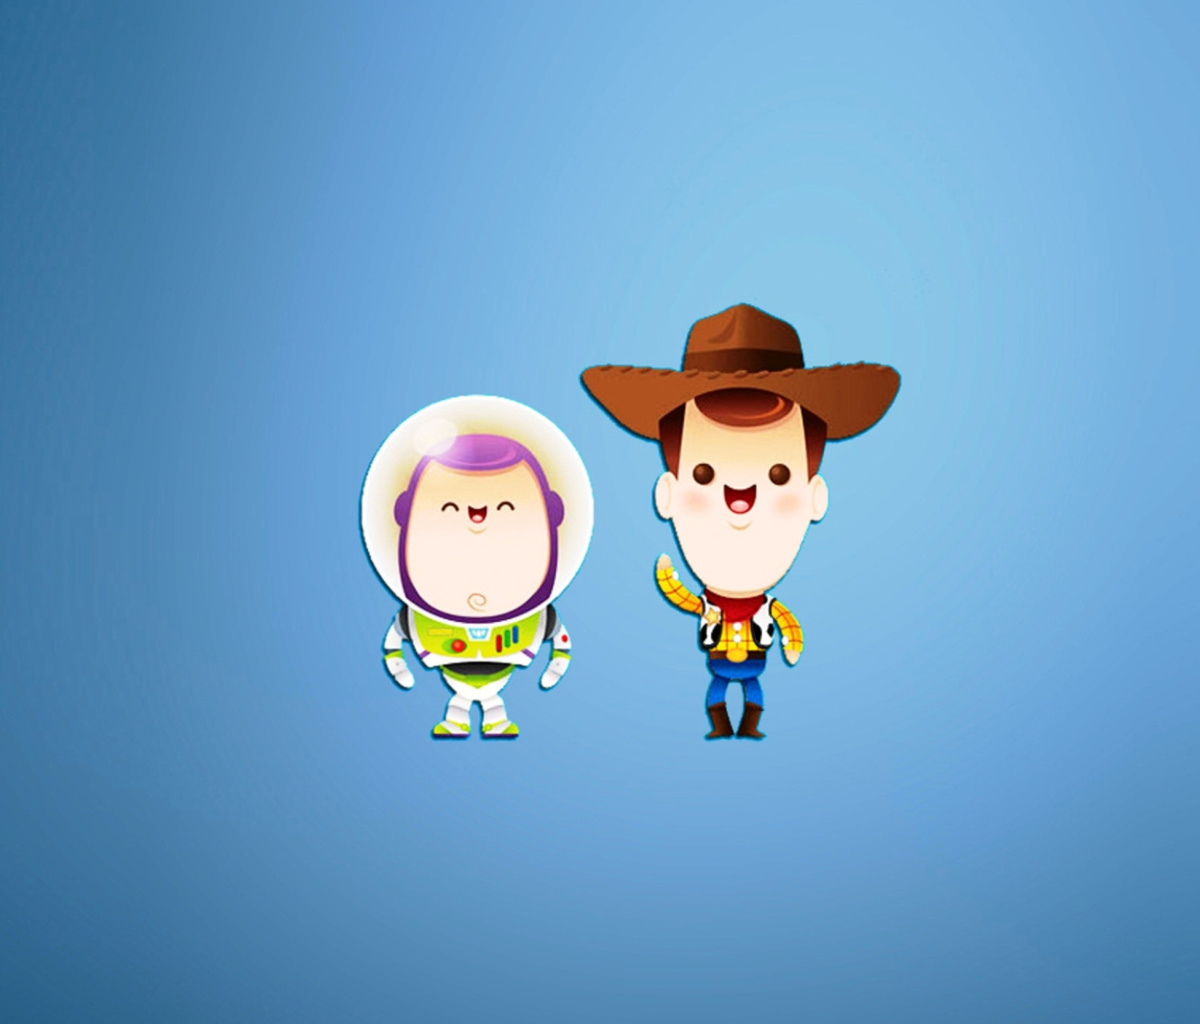 Buzz and Woody in Toy Story wallpaper 1200x1024